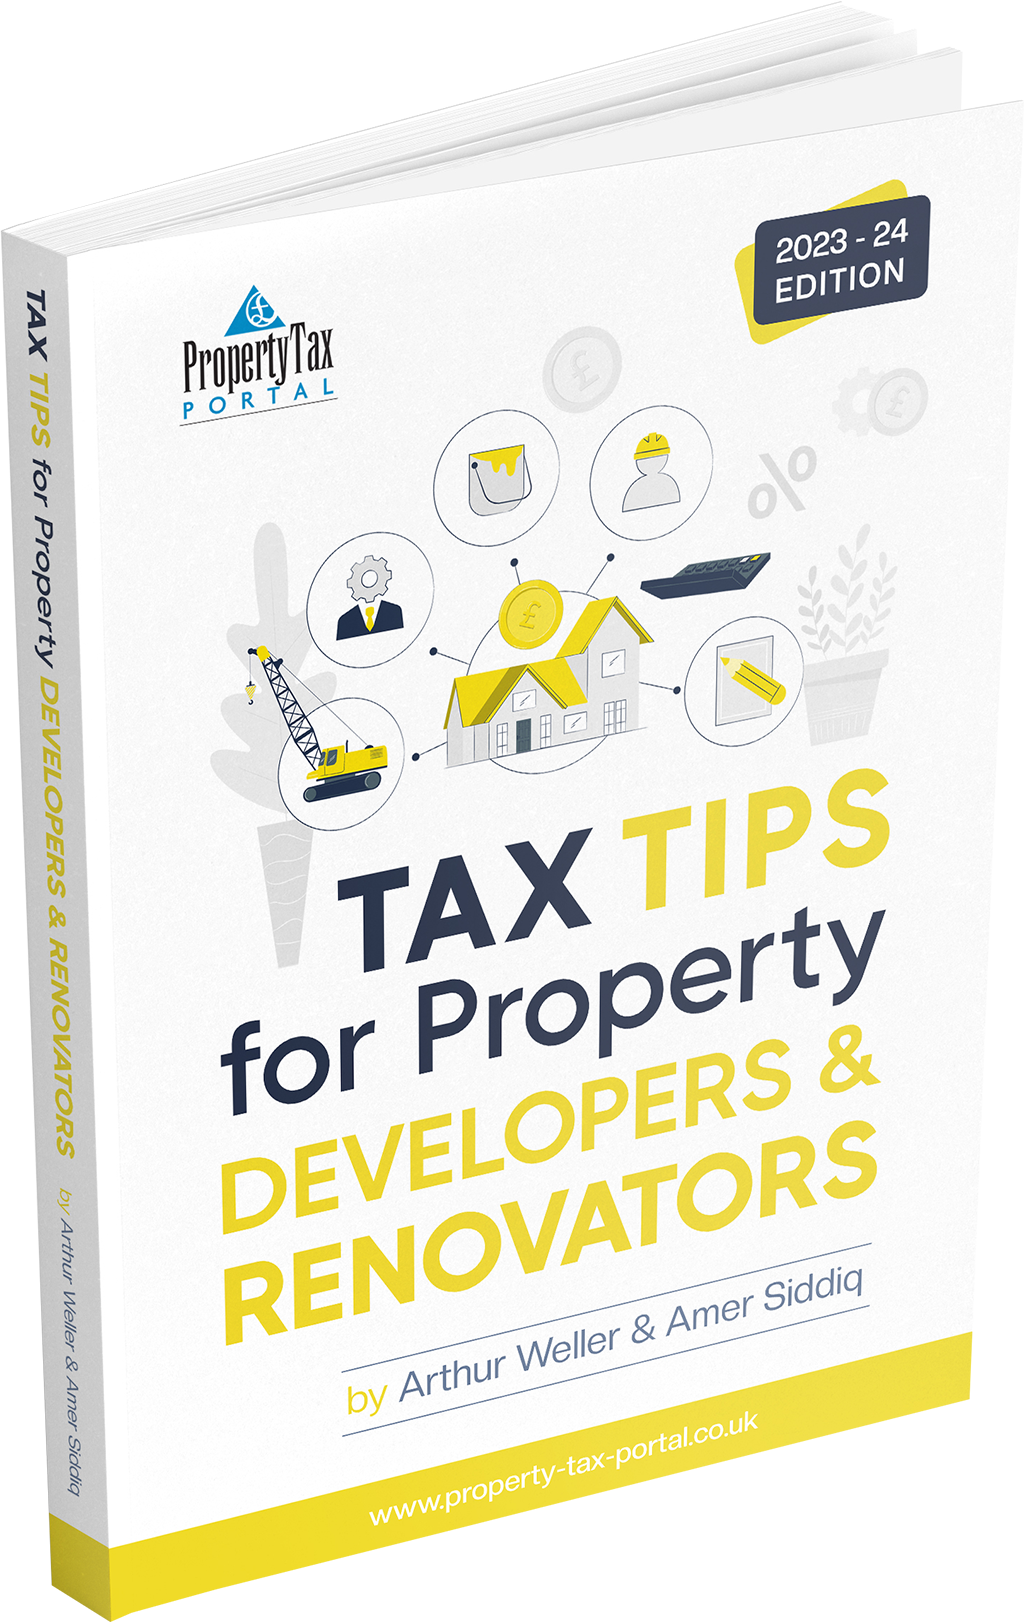 Tax tips for property developers and renovators book cover house